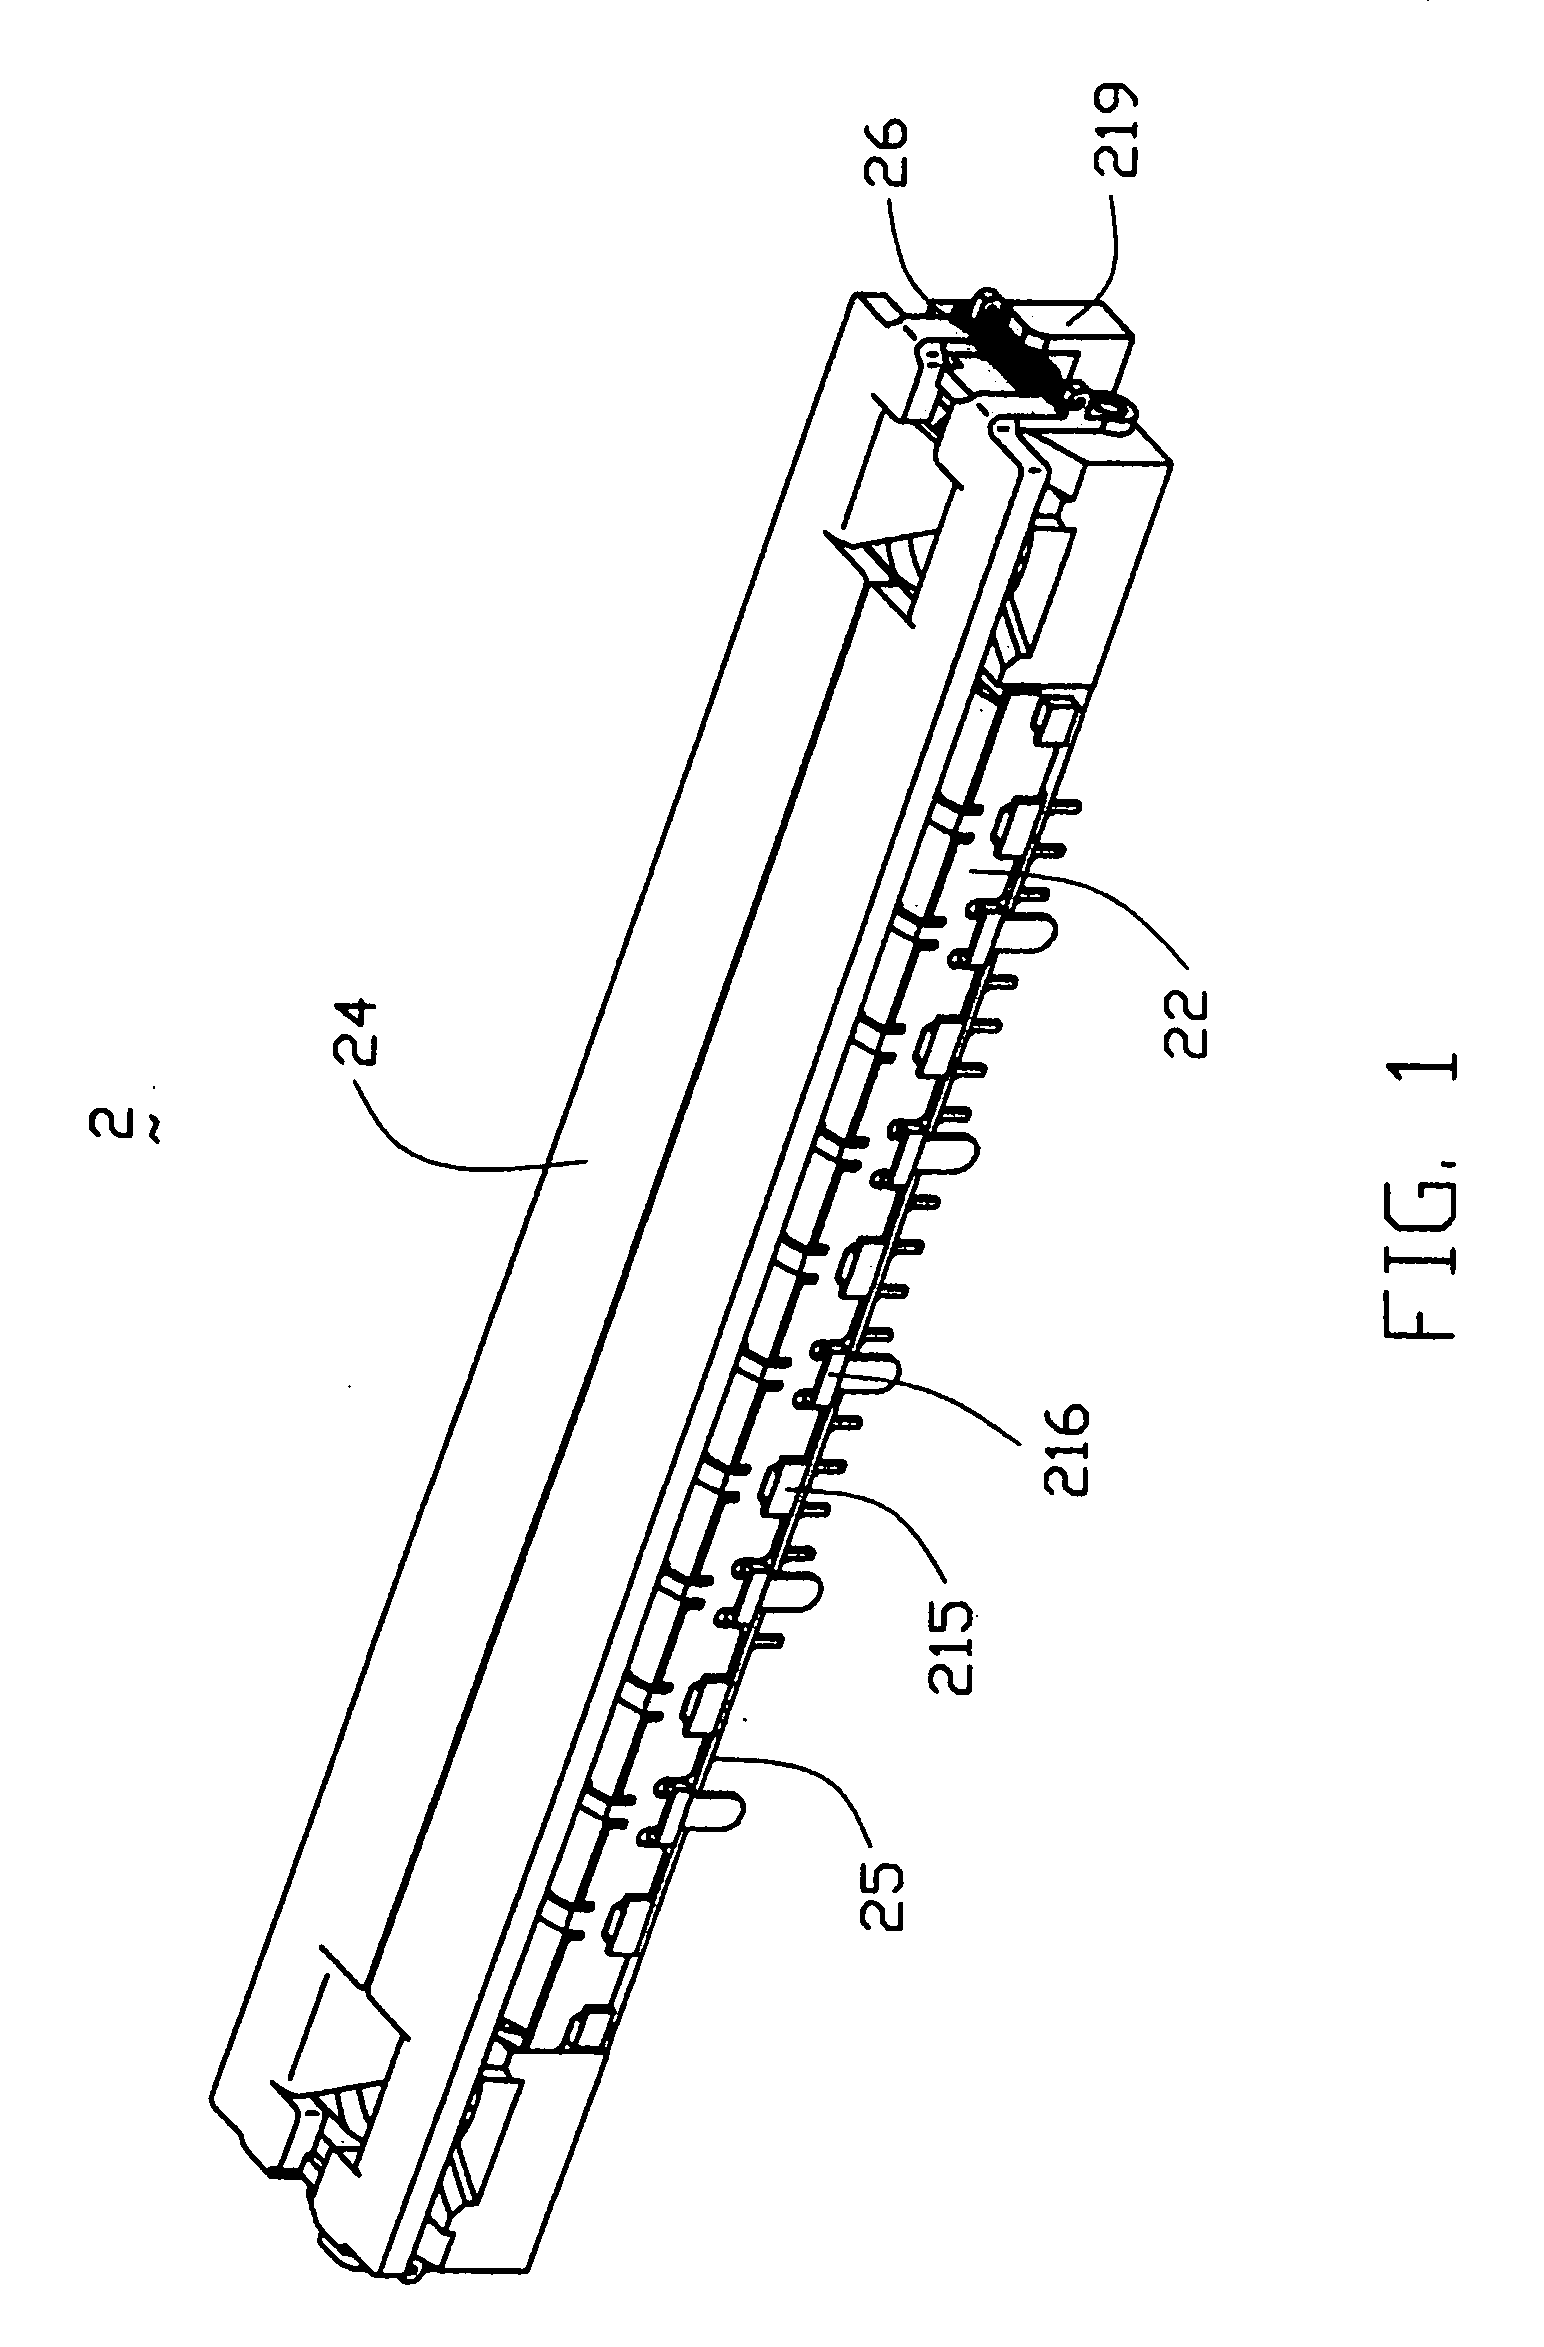 Electrical system with device for preventing electrostatic discharge